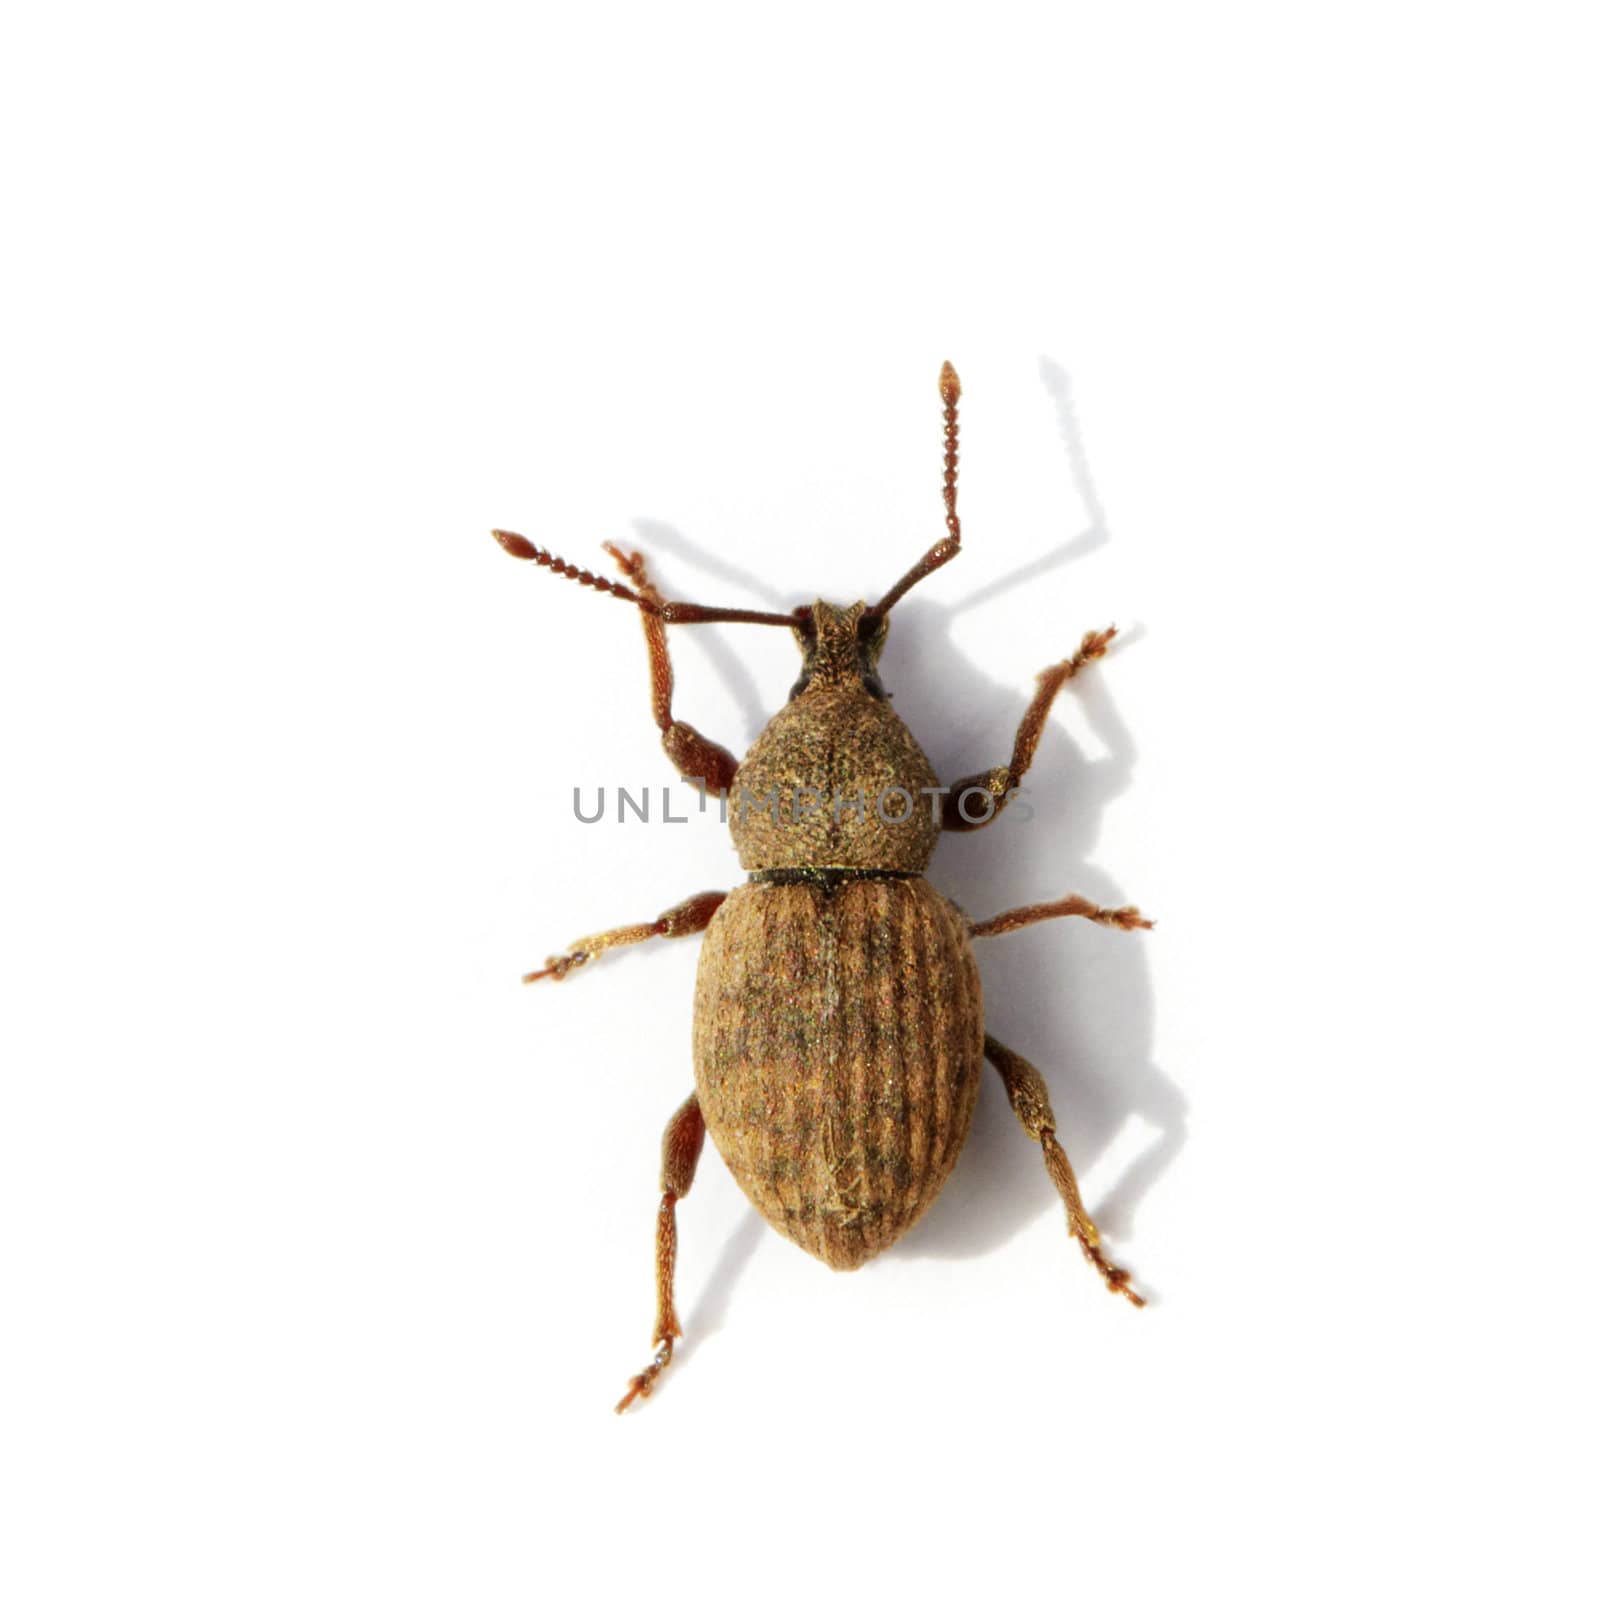 Bug Weevil close up on a white background